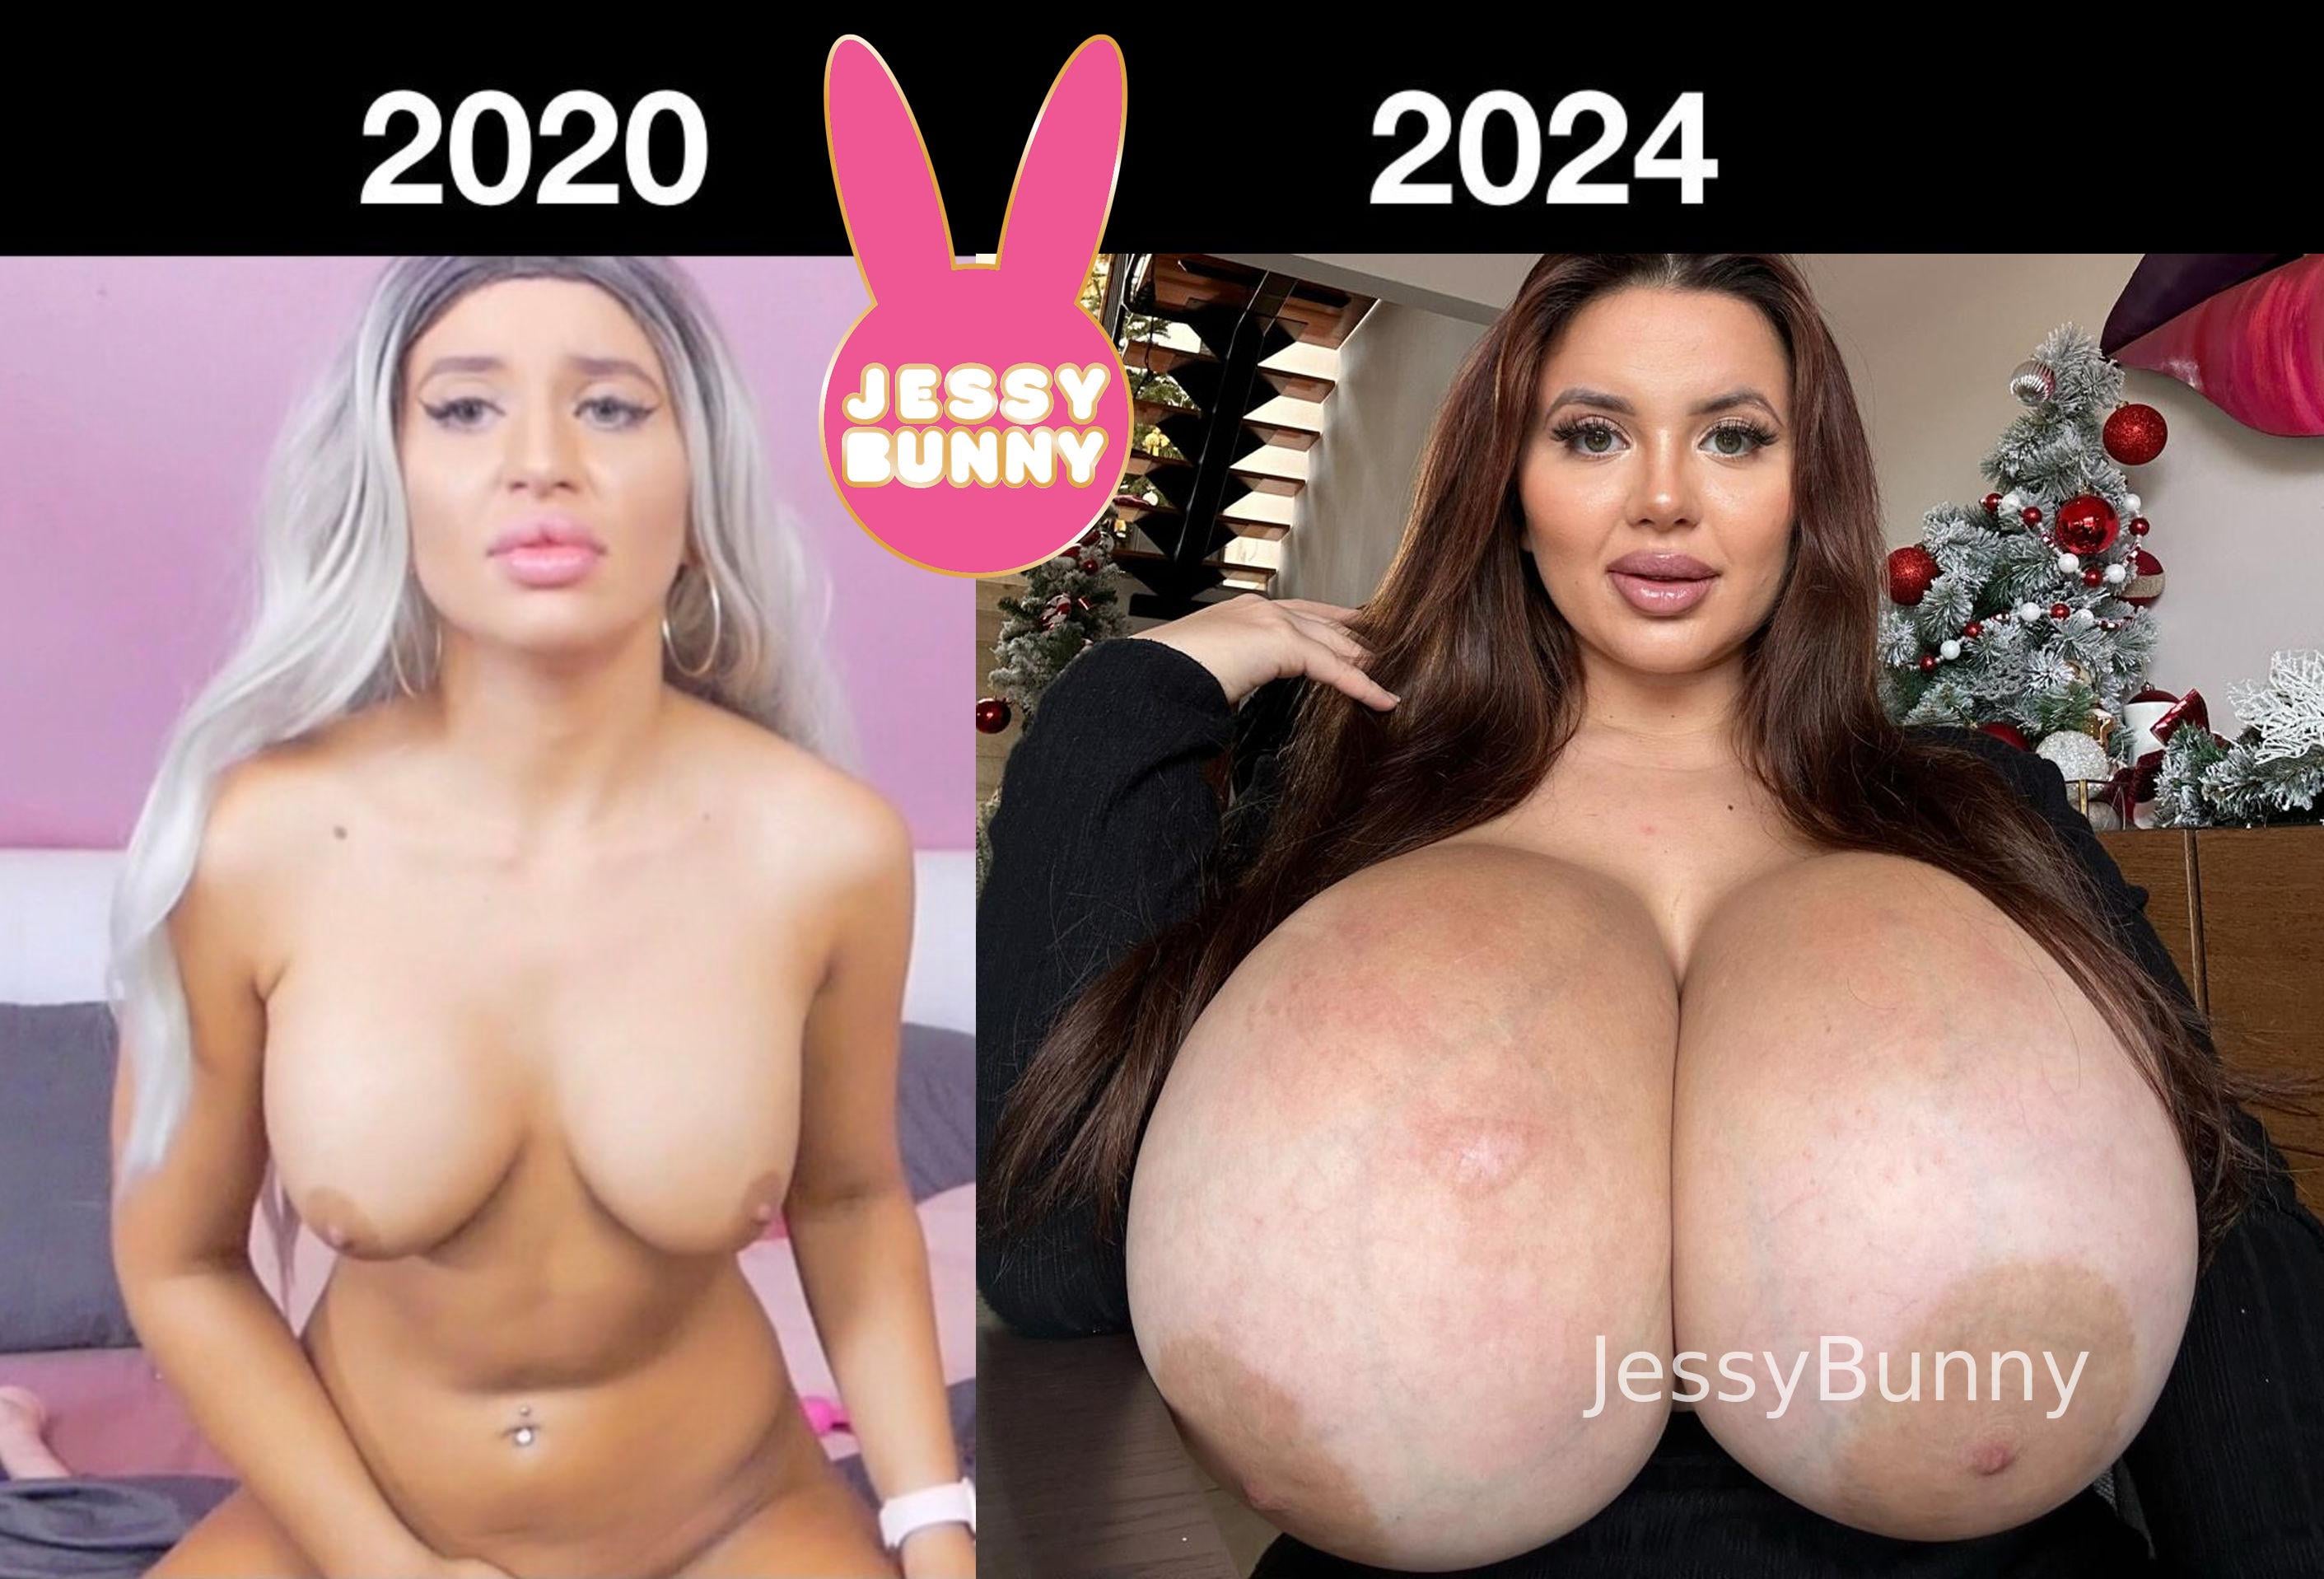 Over 10 Times Bigger Boobs in Just 4 Years 315cc